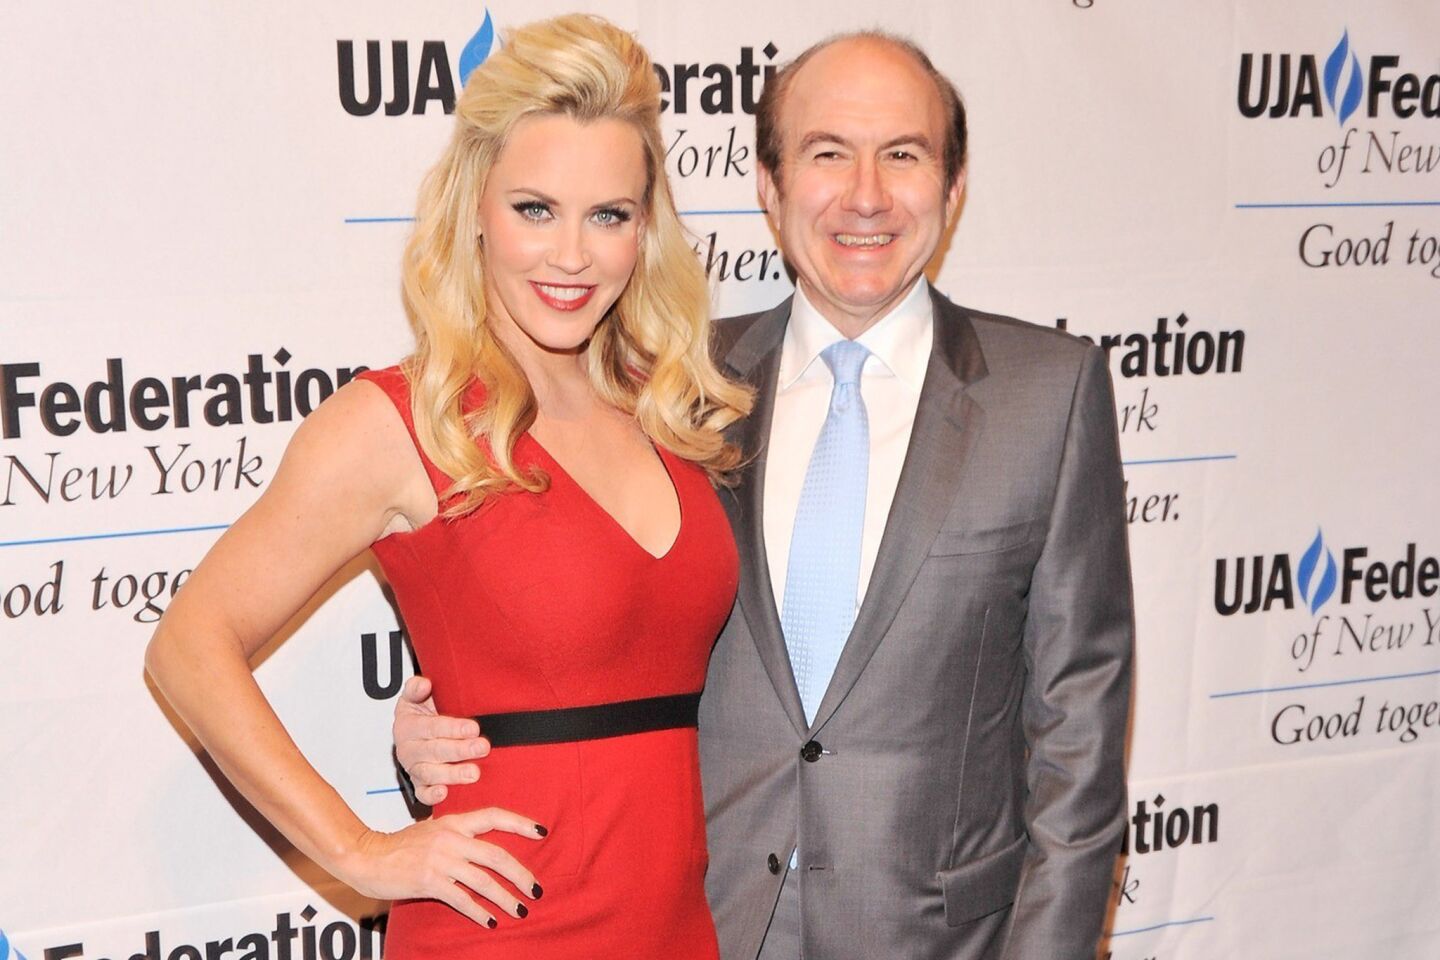 Putting her comedic skills to the test, McCarthy began hosting "The Jenny McCarthy Show" on VH1. It was a pop-culture talk show featuring guests such as Nicole "Snooki" Polizzi, Lil Jon and Bar Refaeli. McCarthy is shown here with Philippe Dauman, chief executive of Viacom Inc.